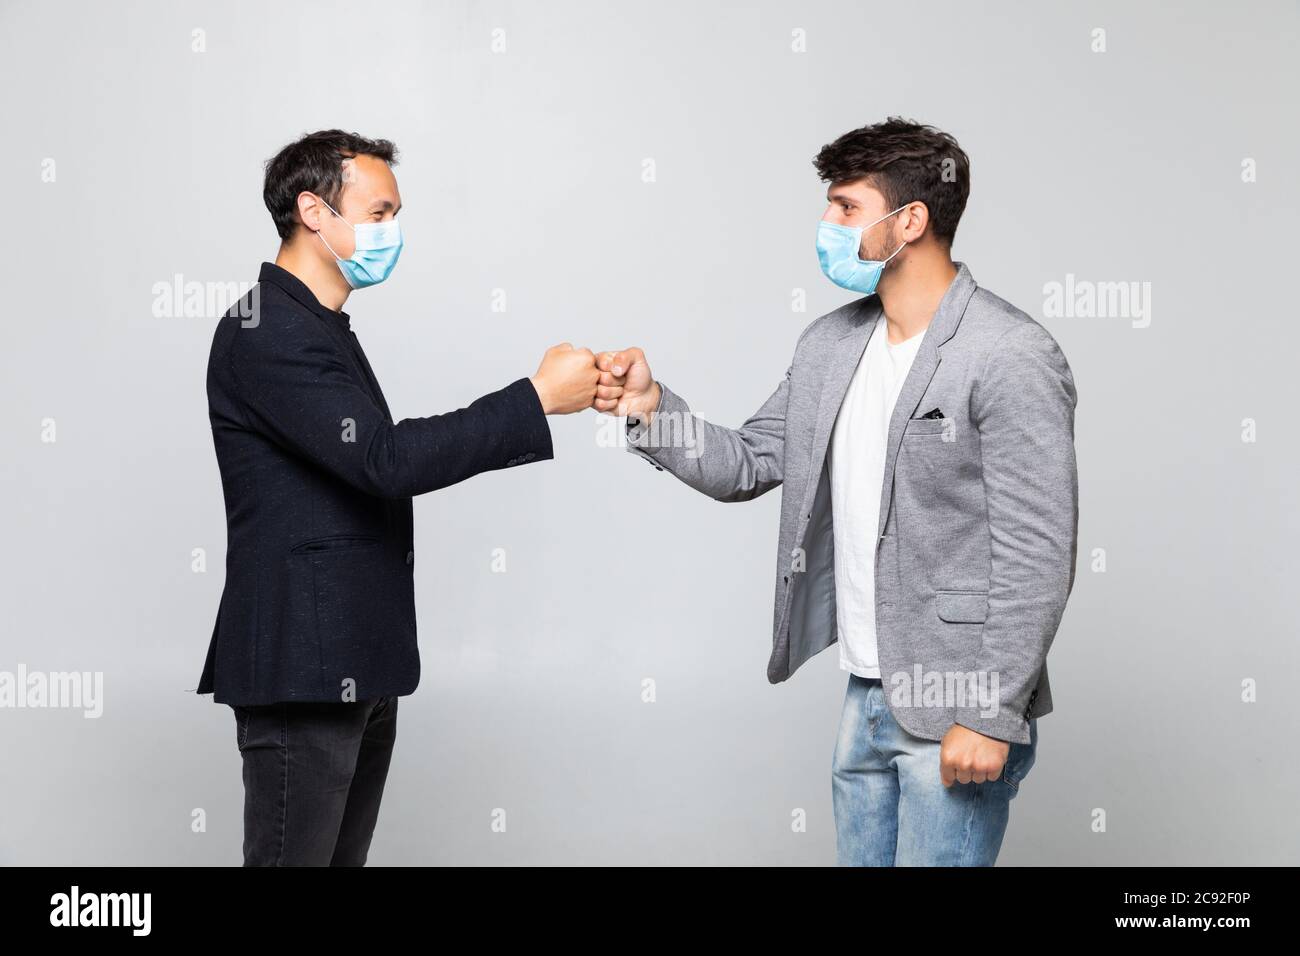 Fist bump greeting. Two people in suits greet each other in a meeting. They give up the untraditional handshake isolated on a white background. Stock Photo